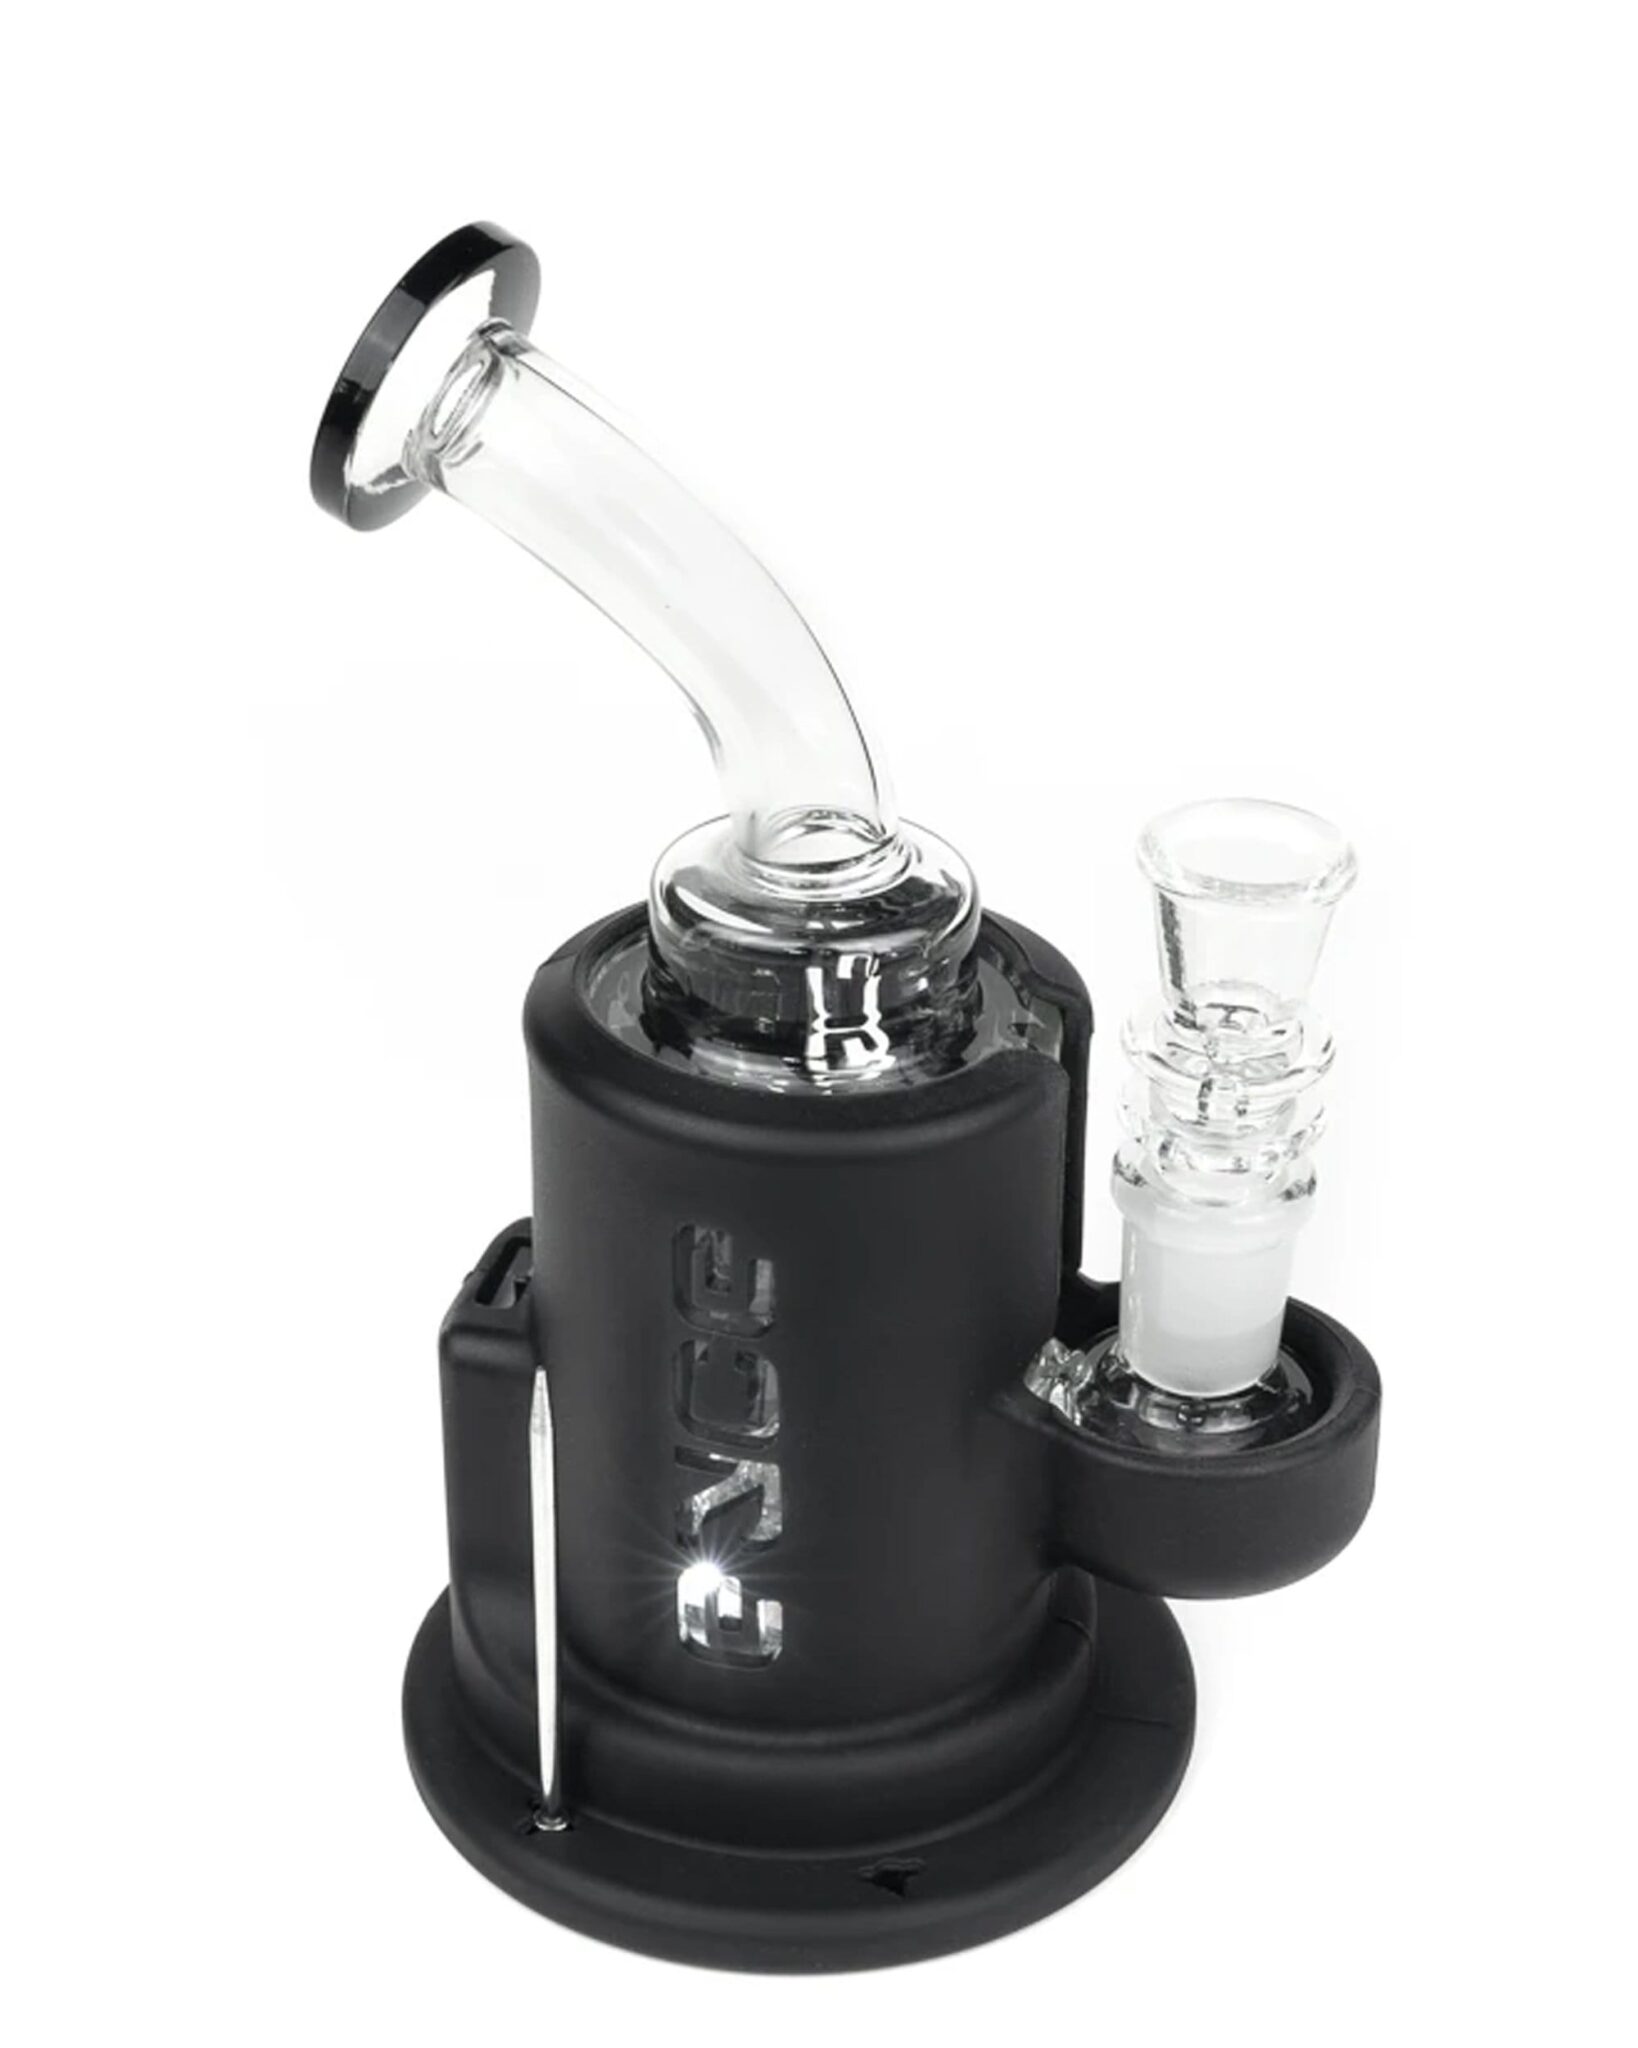 rig for dabs